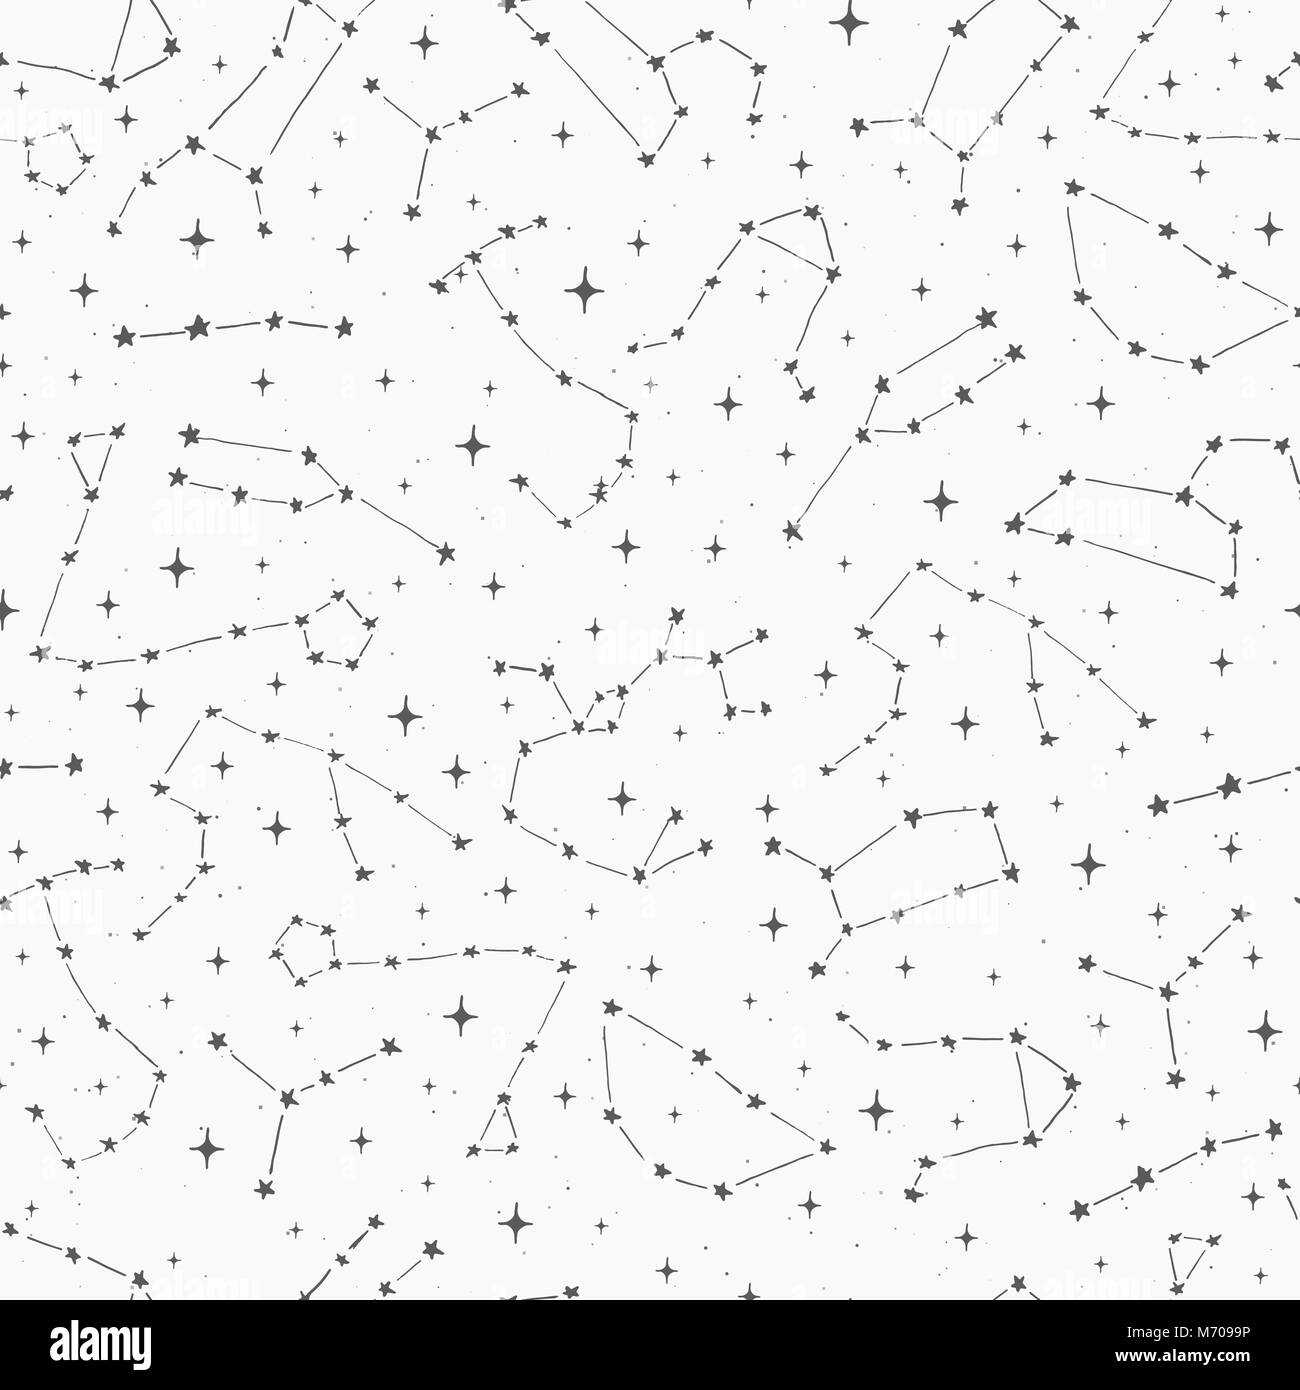 Hand drawn vector seamless pattern with zodiac constellations on the starry background. Space backdrop in sketch style. Stock Vector